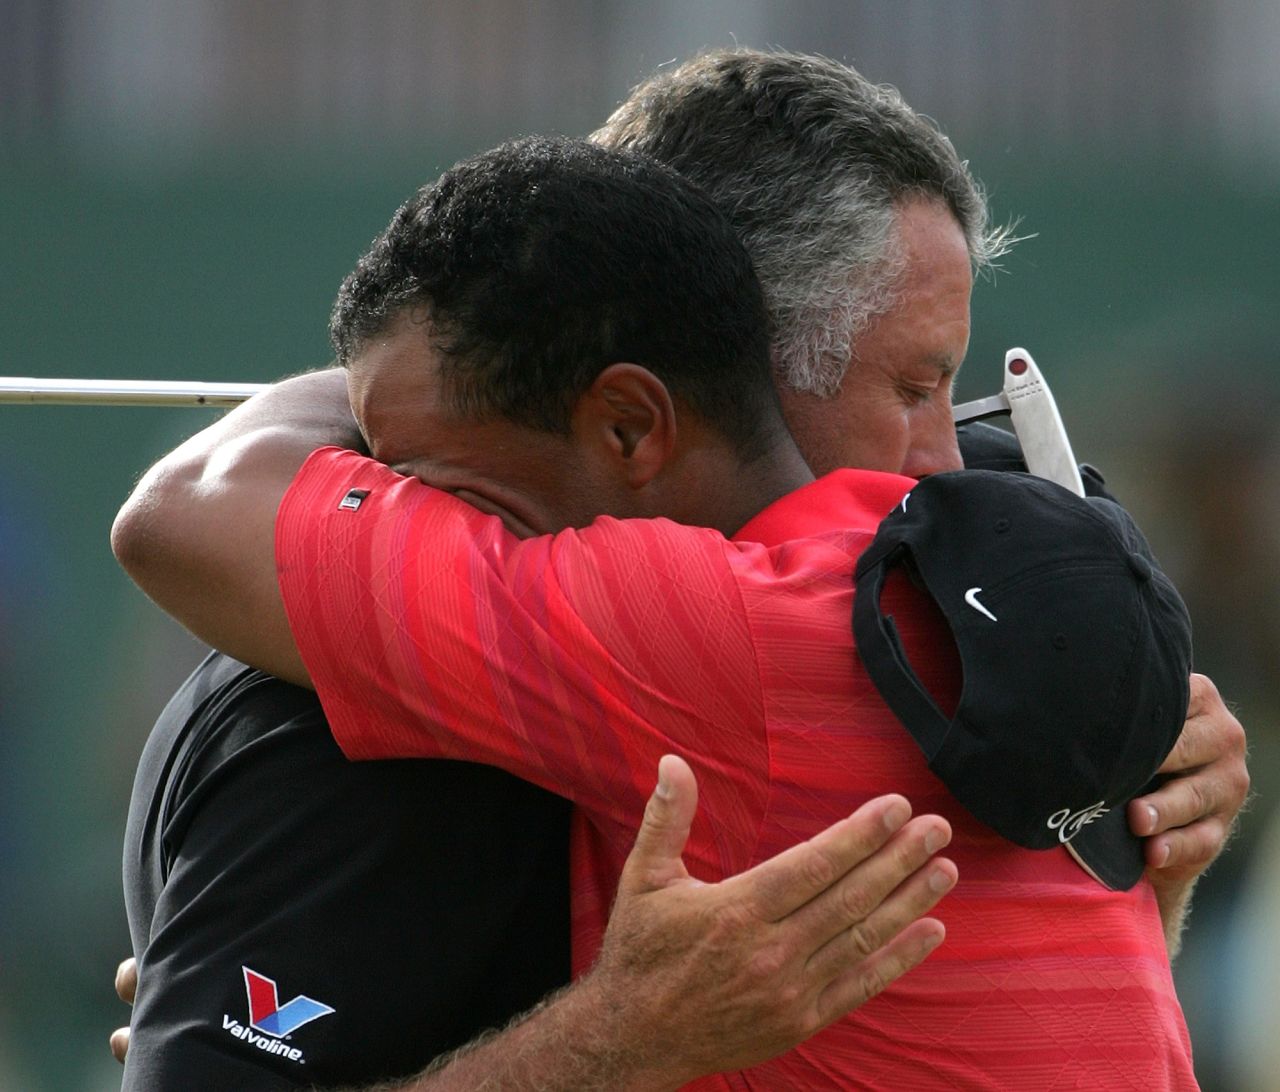 Woods hugs Williams after winning the British Open in Hoylake, England in 2006. It was Woods' first major win since the death of his father just a couple of months earlier.